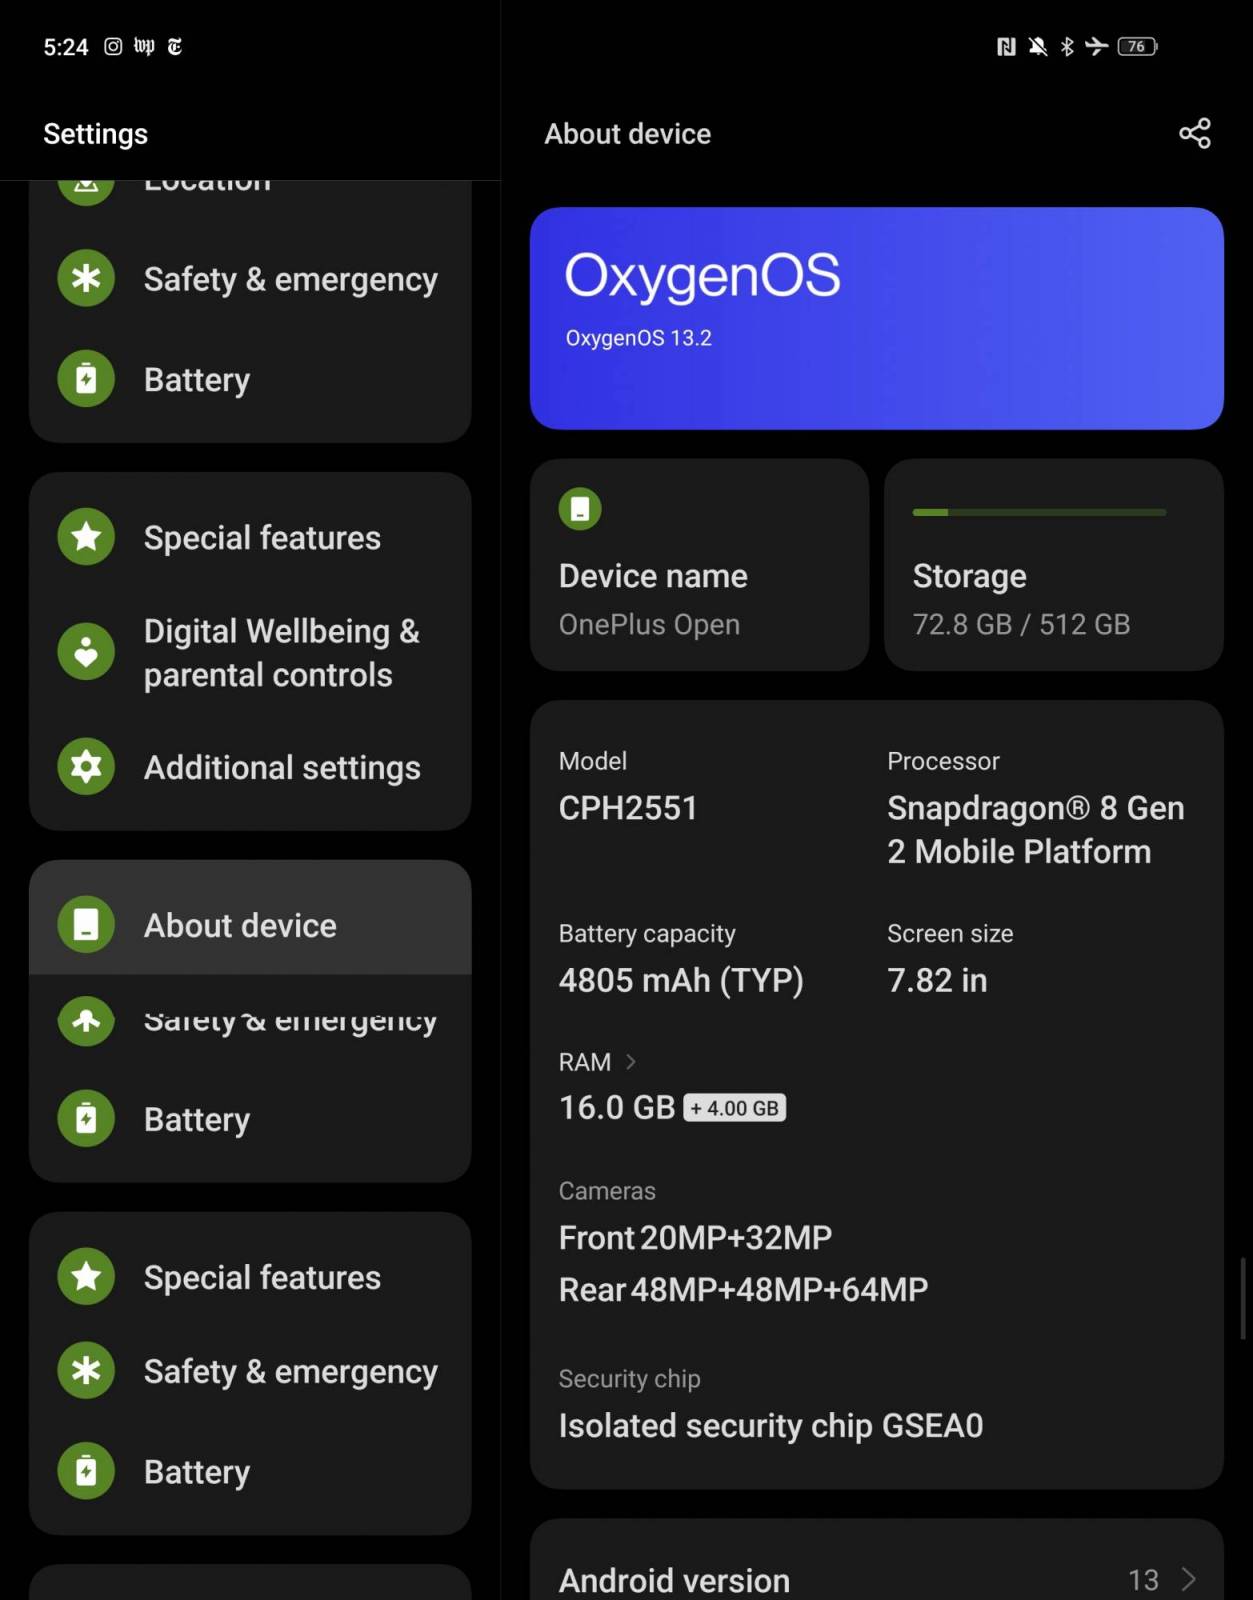 Adding an additional 12GB RAM with RAM Expansion on the OnePlus Open